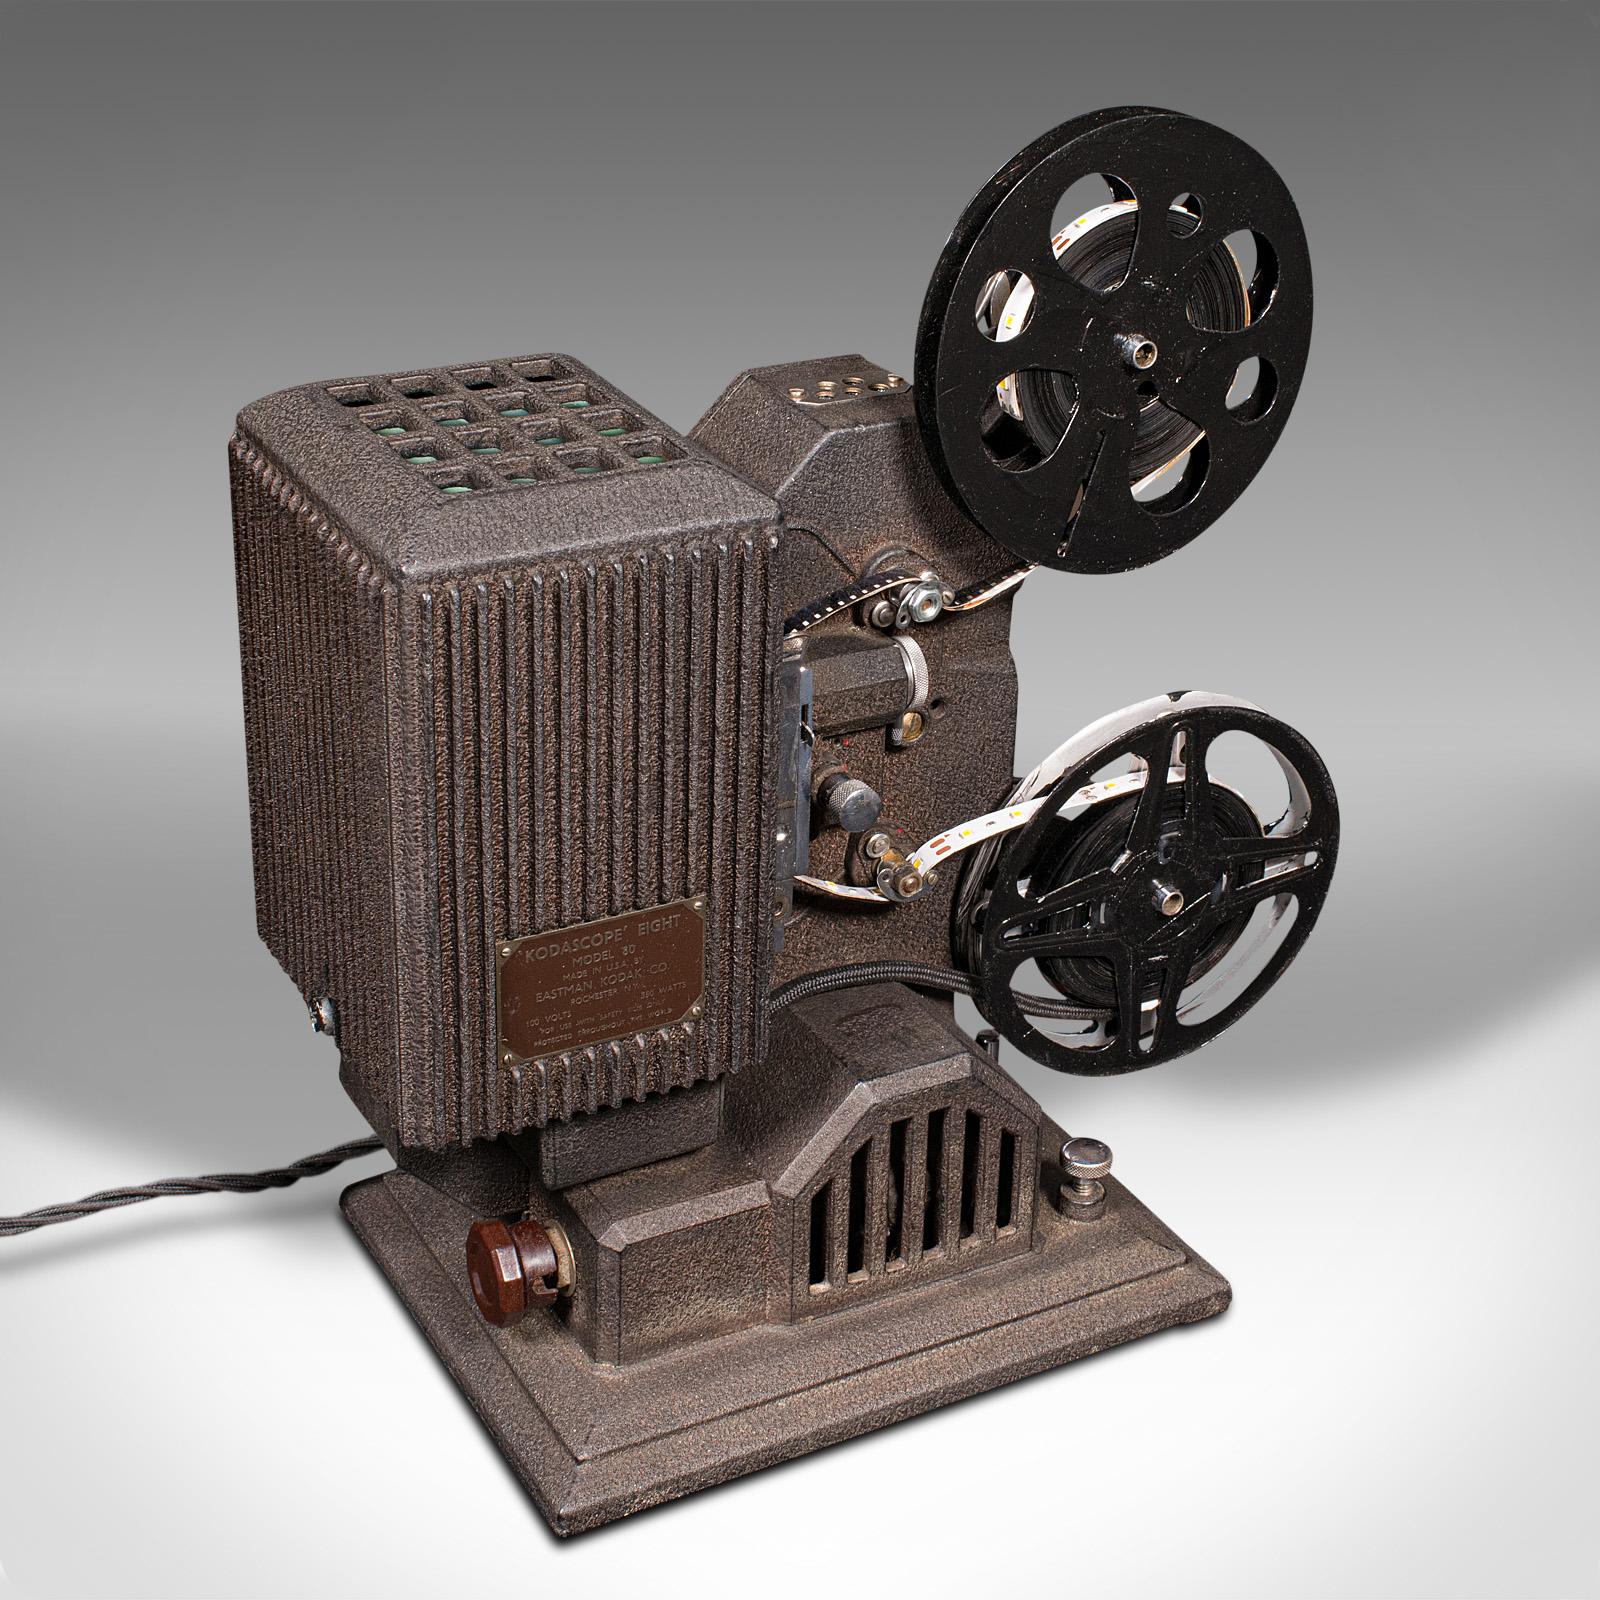 This is a vintage cinema projector lamp. An American, converted decorative accent light, dating to the mid 20th century, circa 1940.

Captivating lamp conversion for the collector of cinematic interest
Displays a desirable aged patina and in good